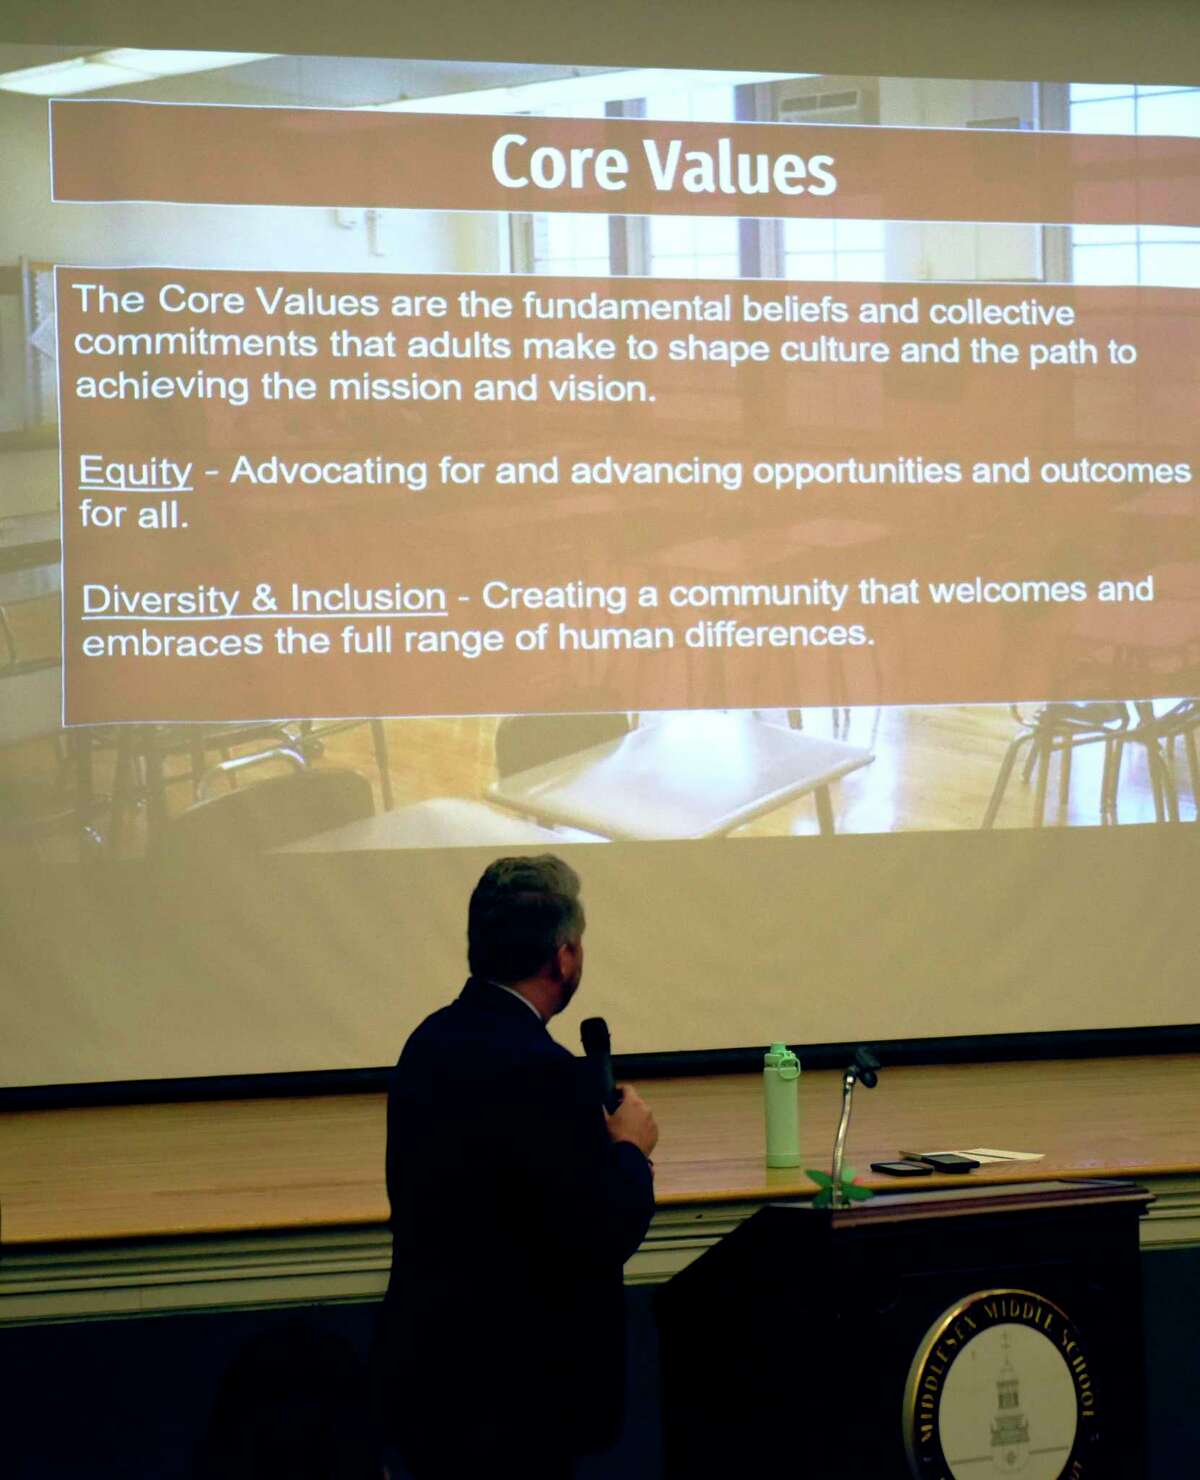 Core values are outlined during the Darien Public Schools inaugural Diversity, Equity, and Inclusion (DEI) Committee meeting at Middlesex Middle School in Darien, Conn. Monday, Feb. 28, 2022. The DEI Committee met for the first time Monday to outline its goals for the coming year.